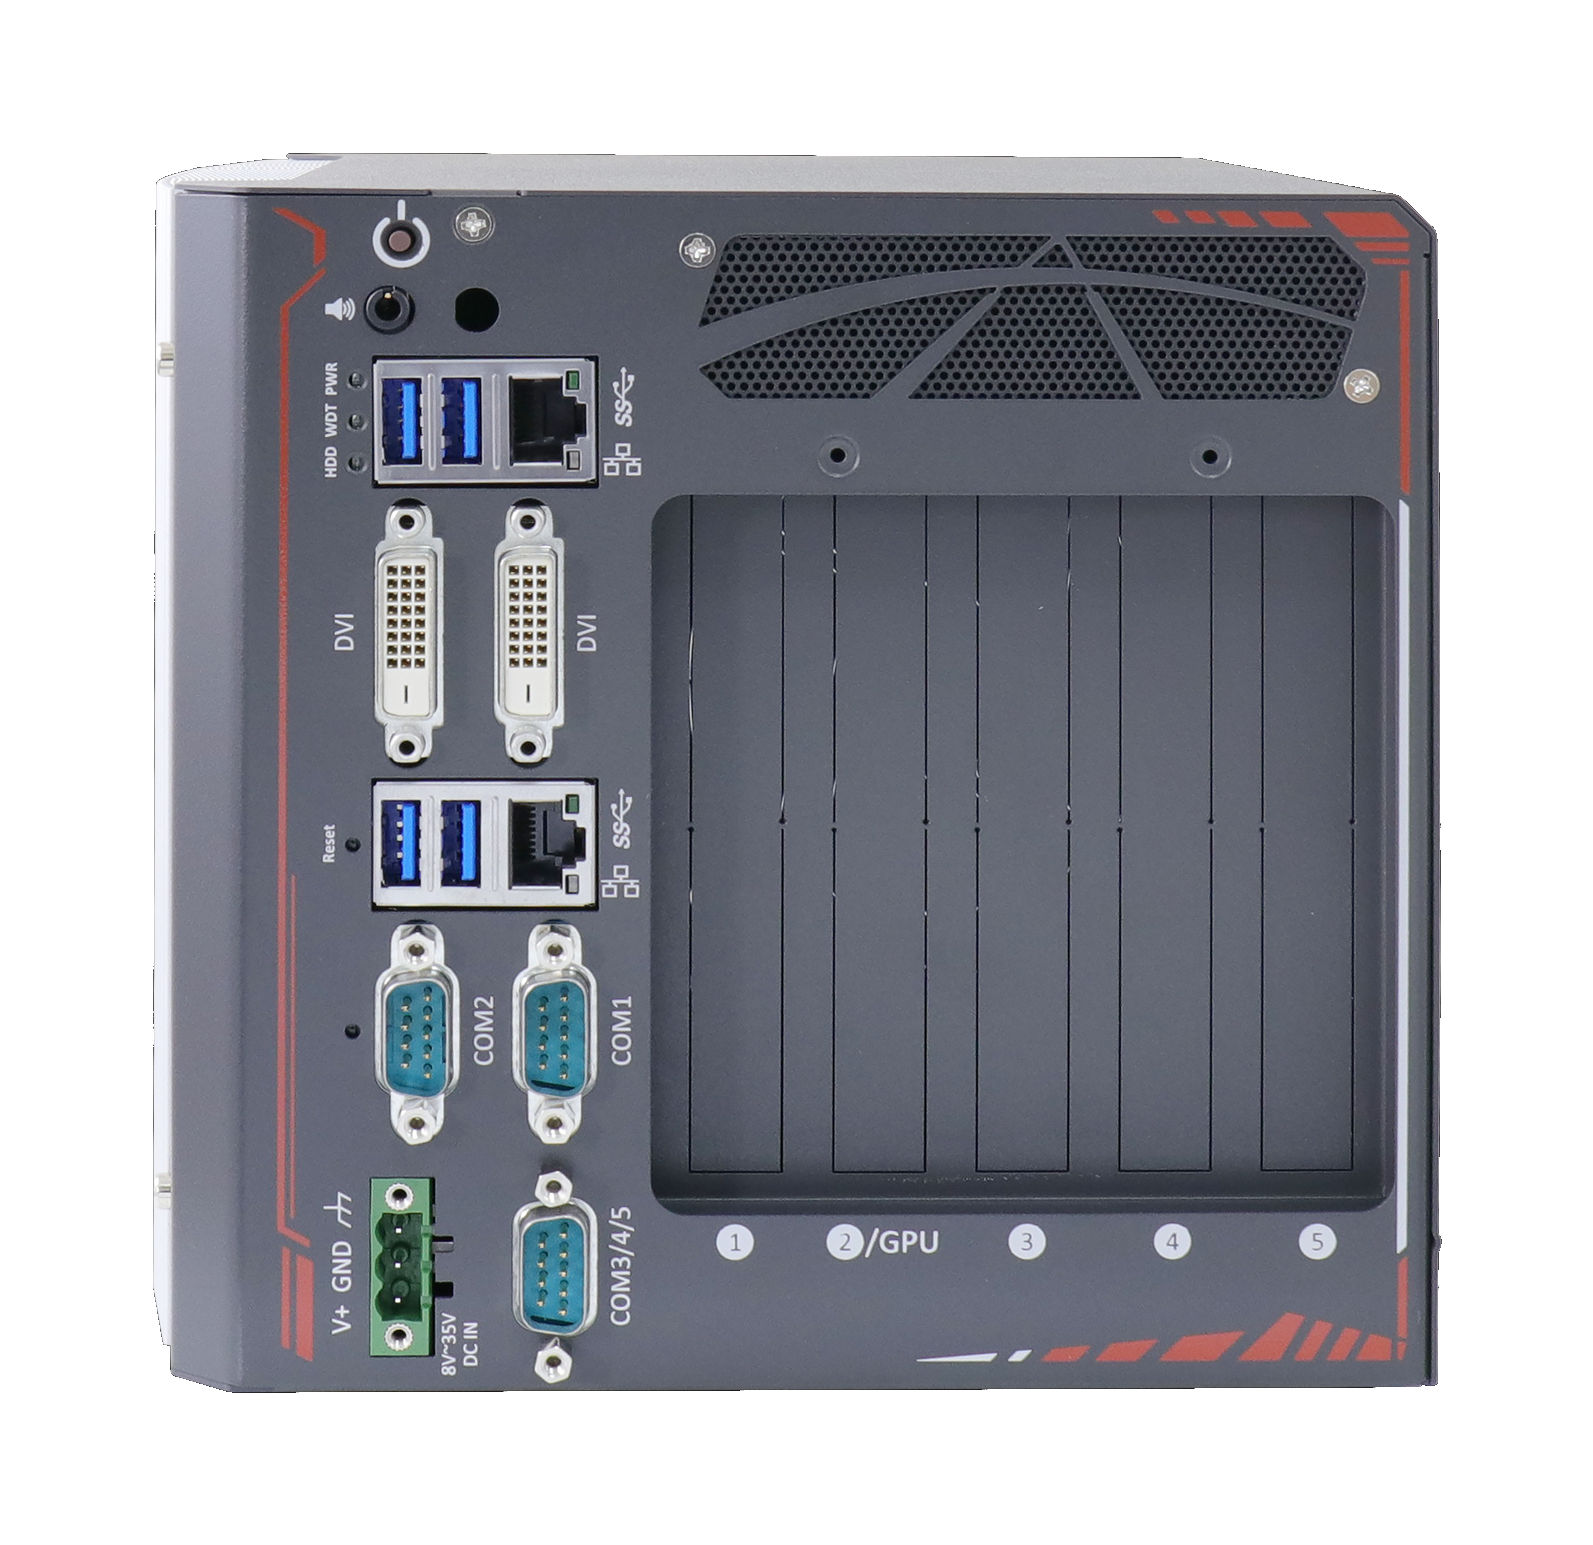 Nuvo-8023 front I/O